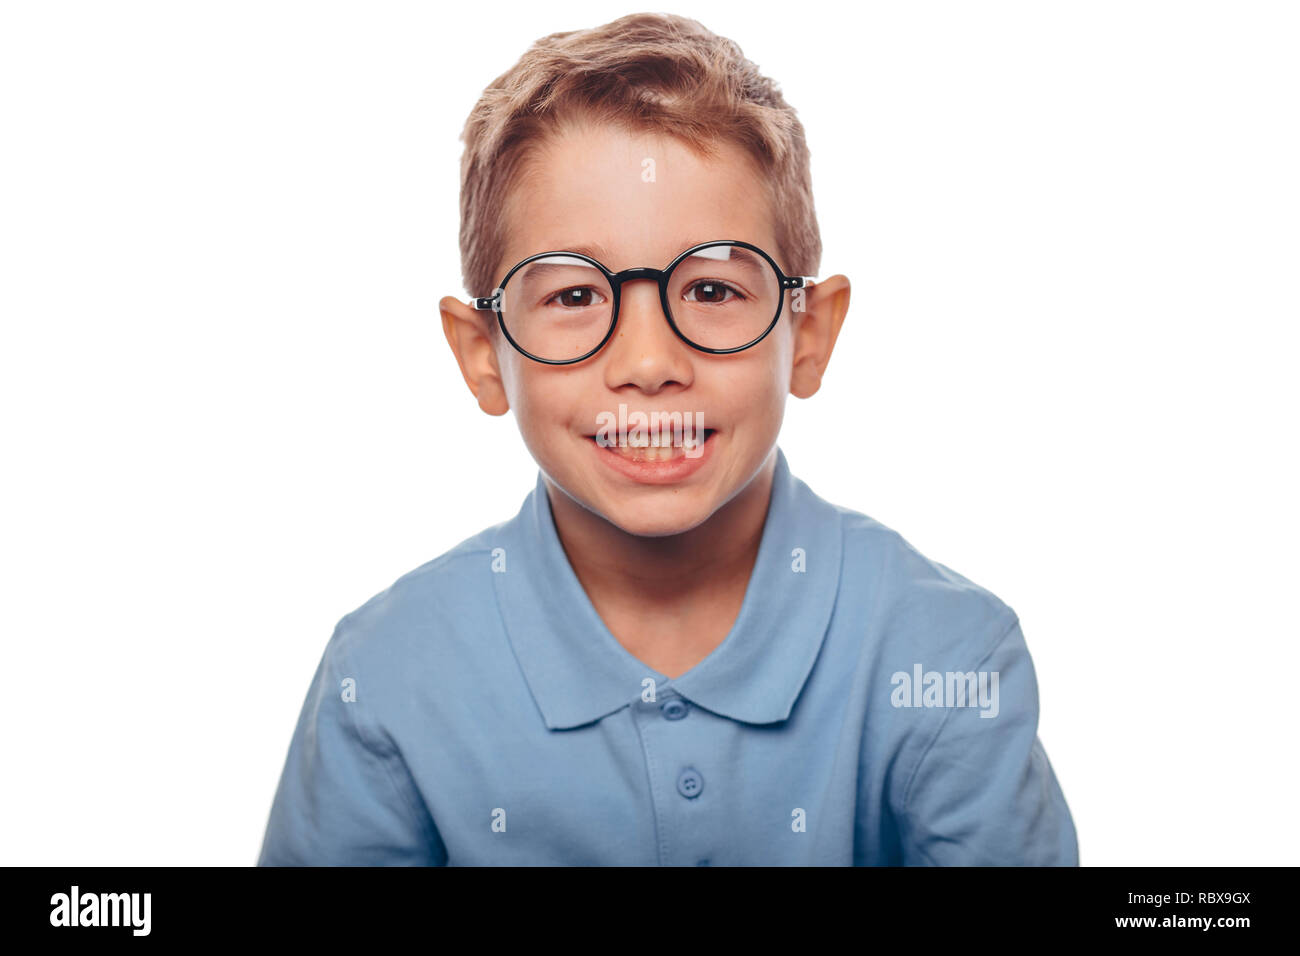 cucasian boy ajusting his eyeglasses and looking at camera over white background. Concept new eyeglasses for good vision Stock Photo